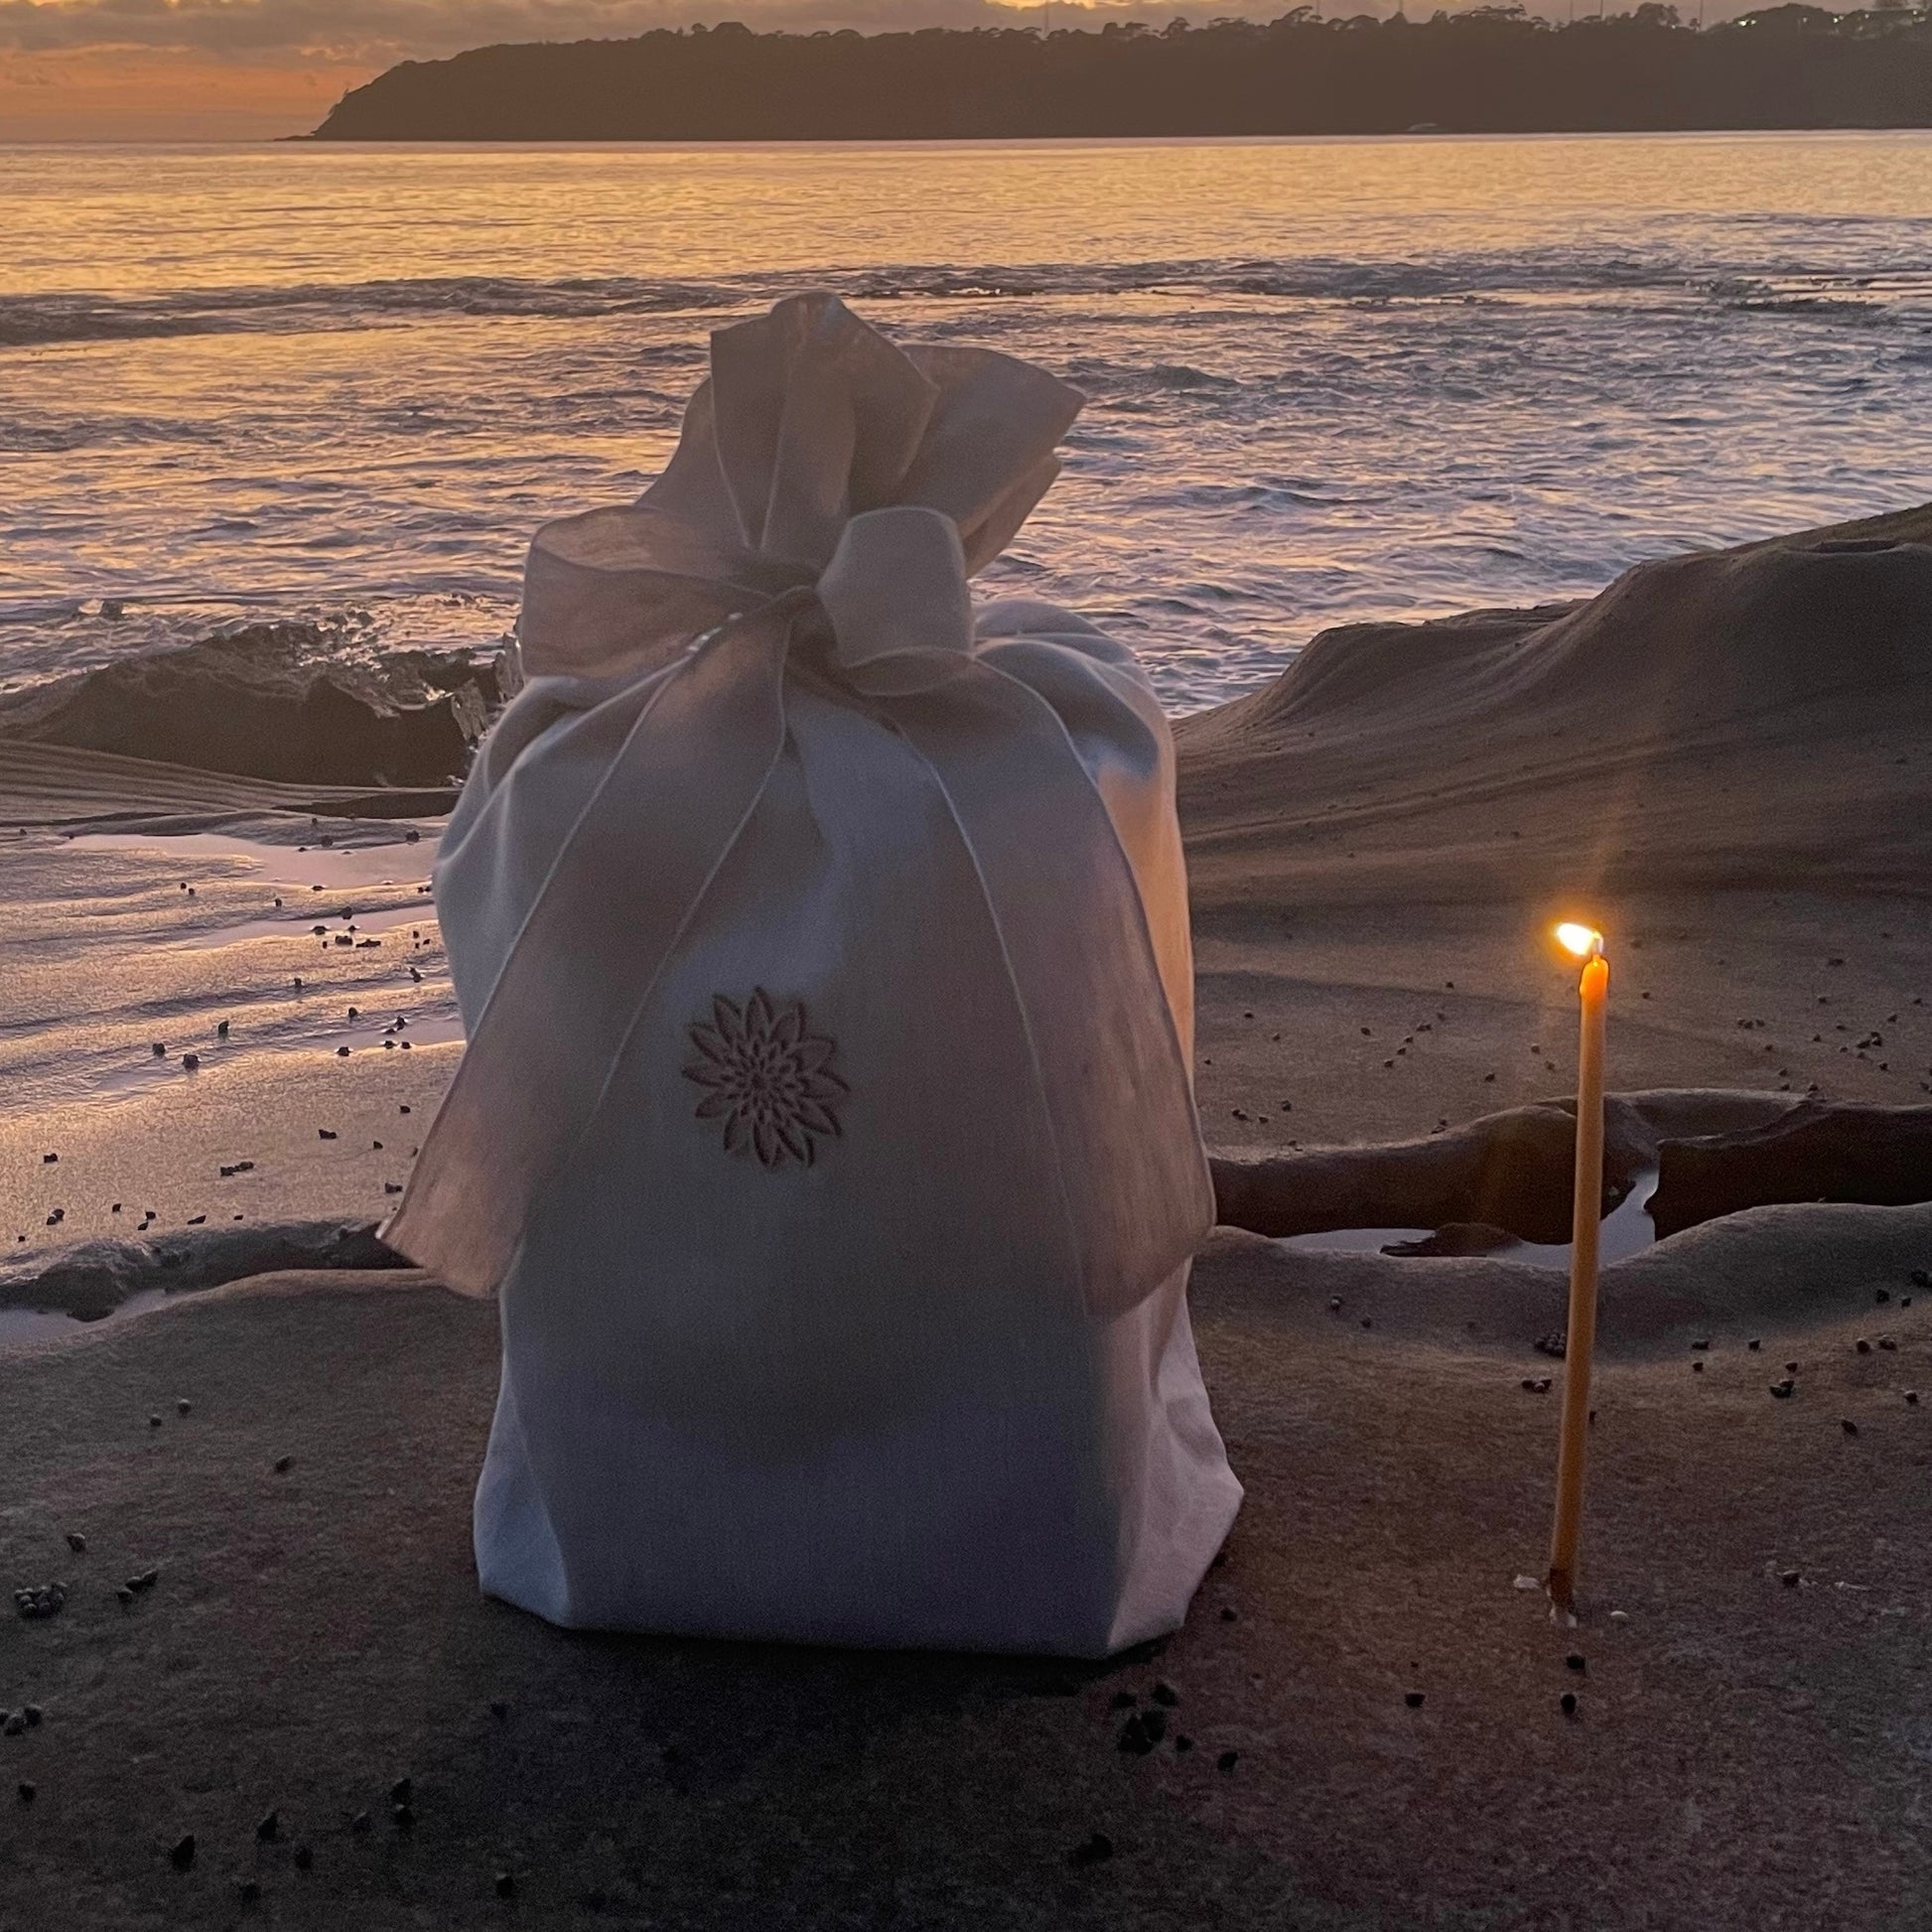 White linen funeral urn sitting on a rock at sunrise with the ocean in the background a burning devotional candle.